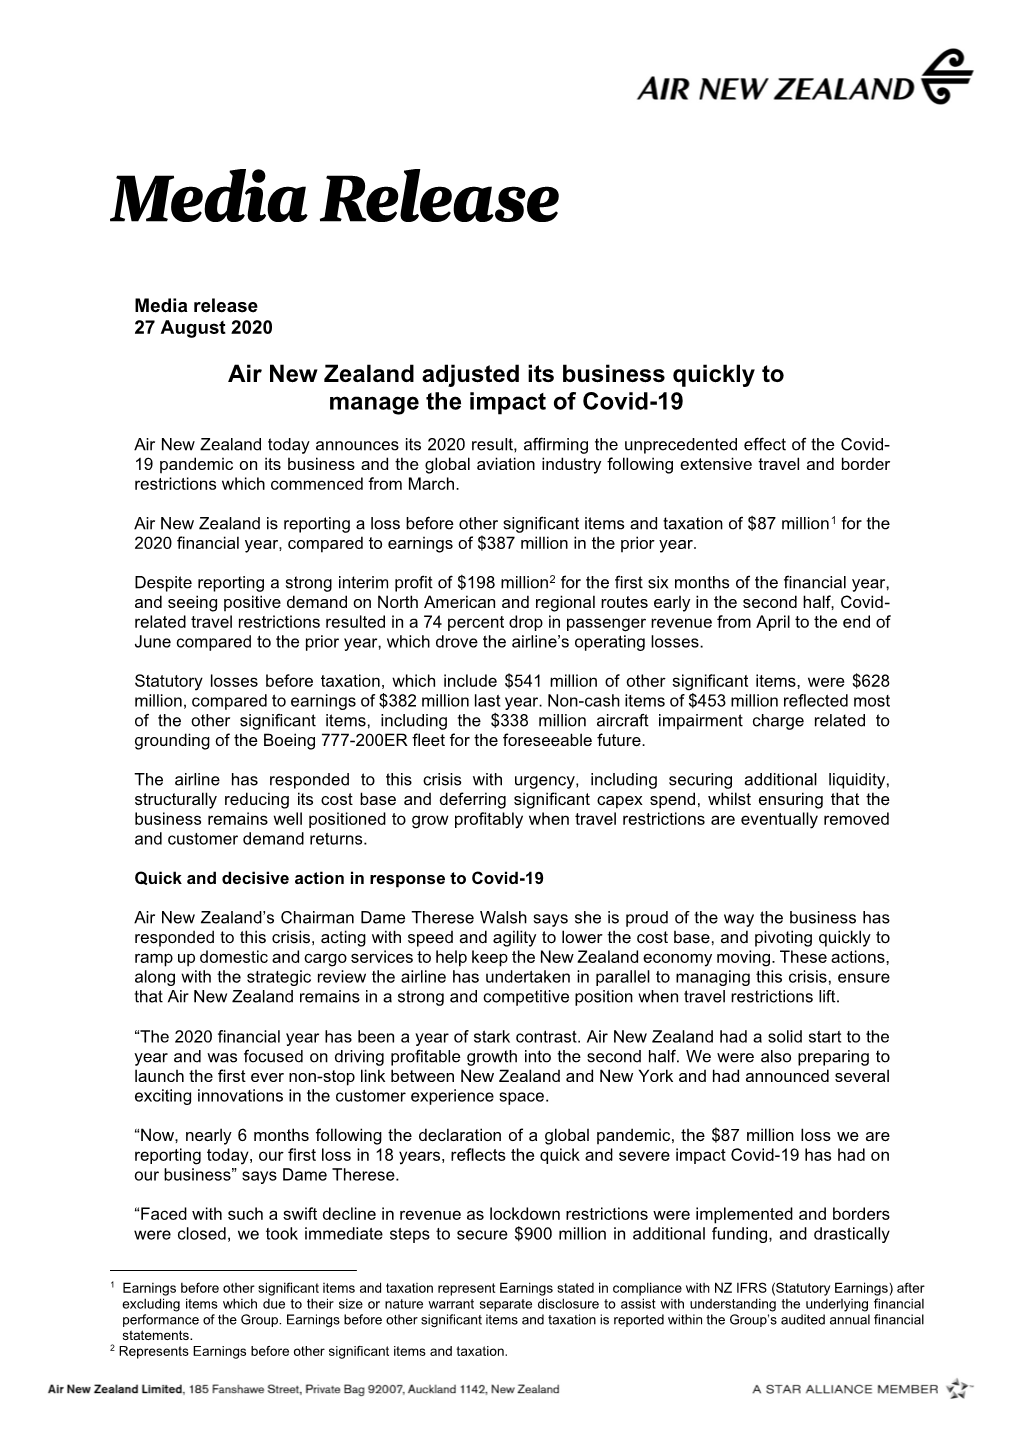 Air New Zealand Adjusted Its Business Quickly to Manage the Impact of Covid-19